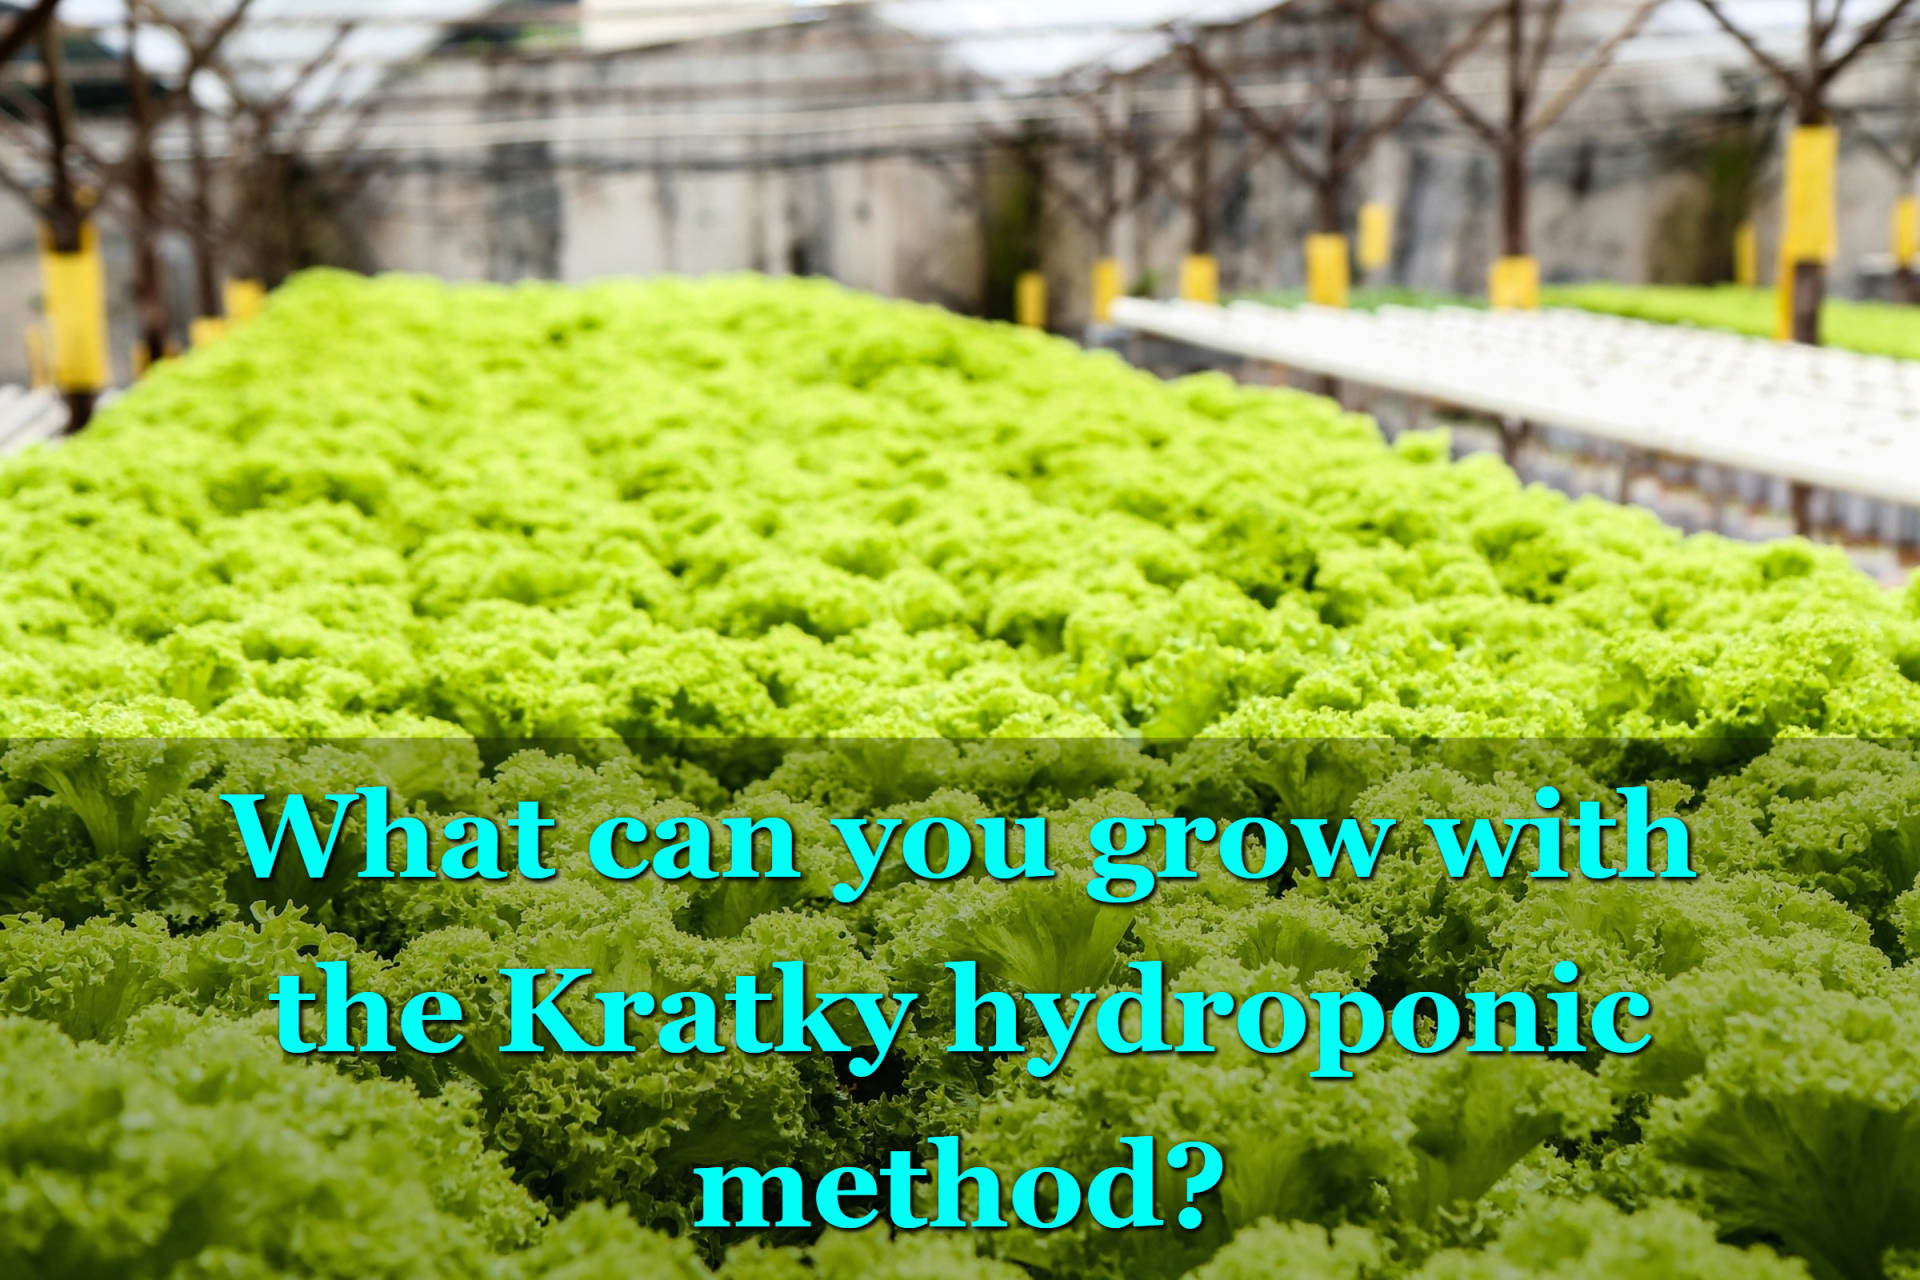 What Can You Grow with The Kratky Hydroponic Method?